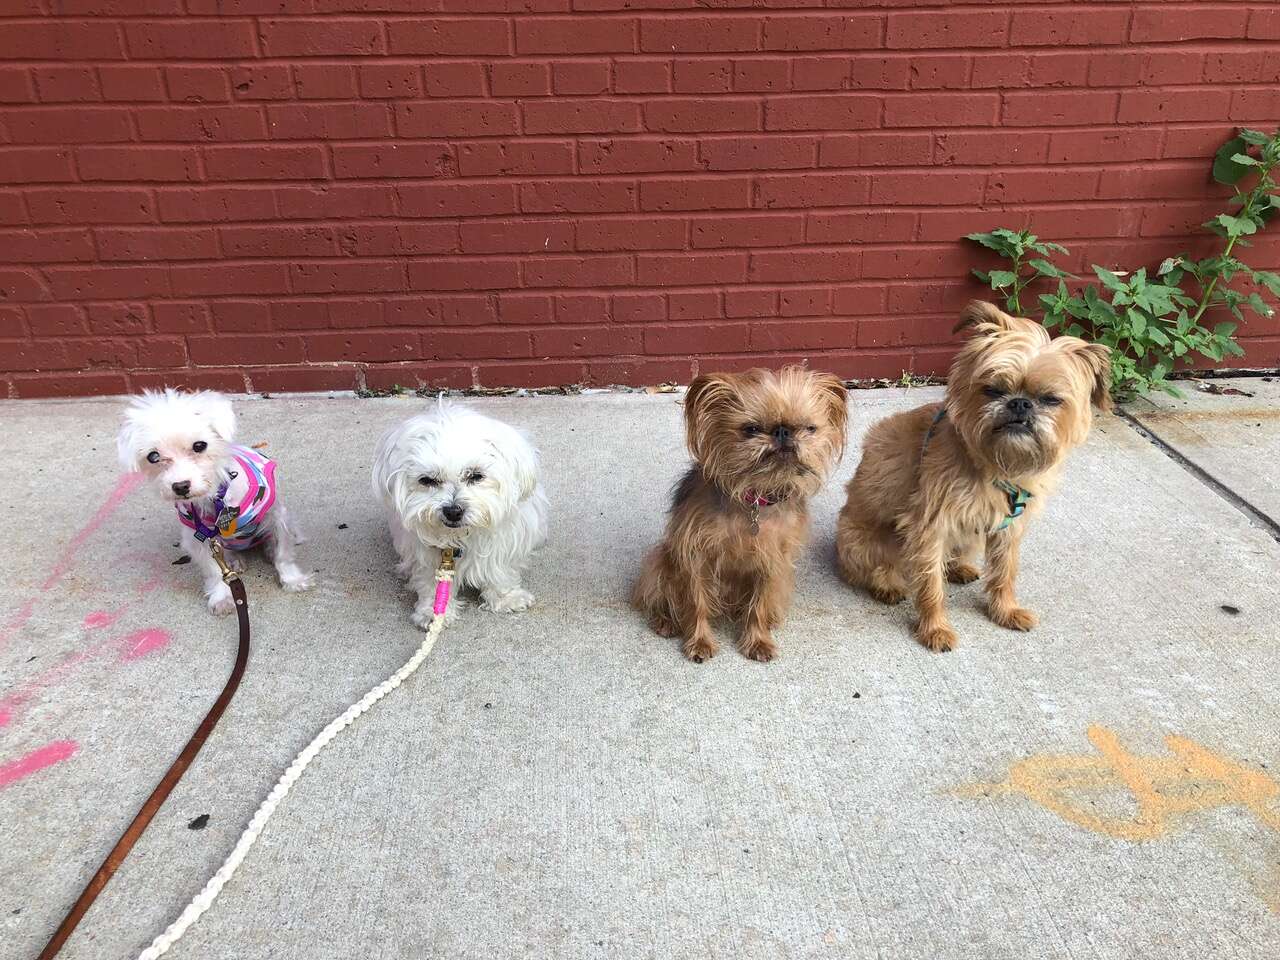 Astrid and her three rescue dog friends at her foster home